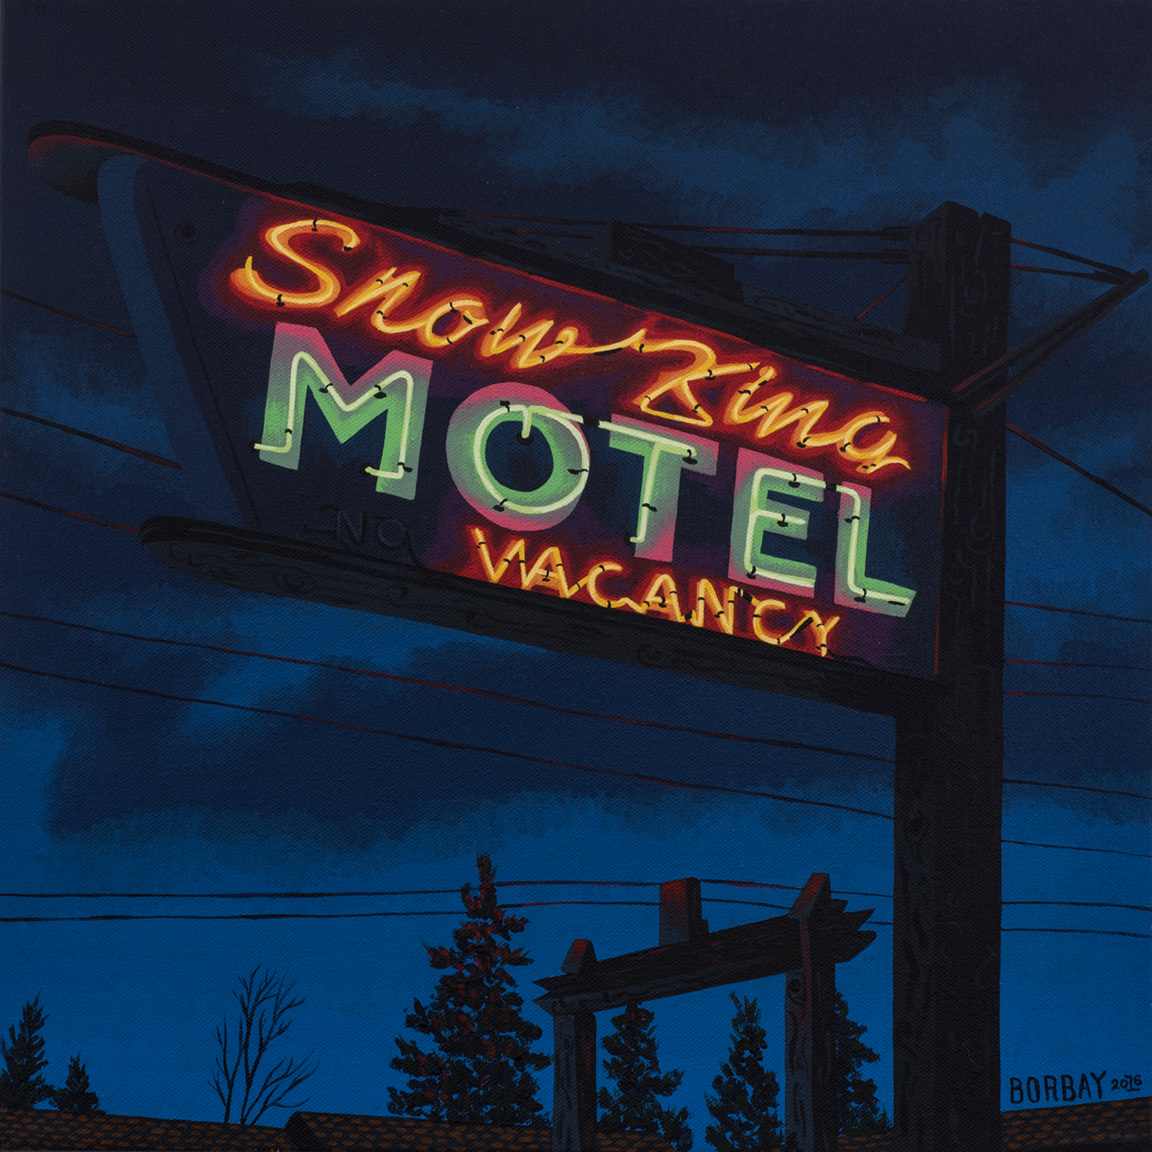 Snow King Motel Neon Sign Painting by Borbay